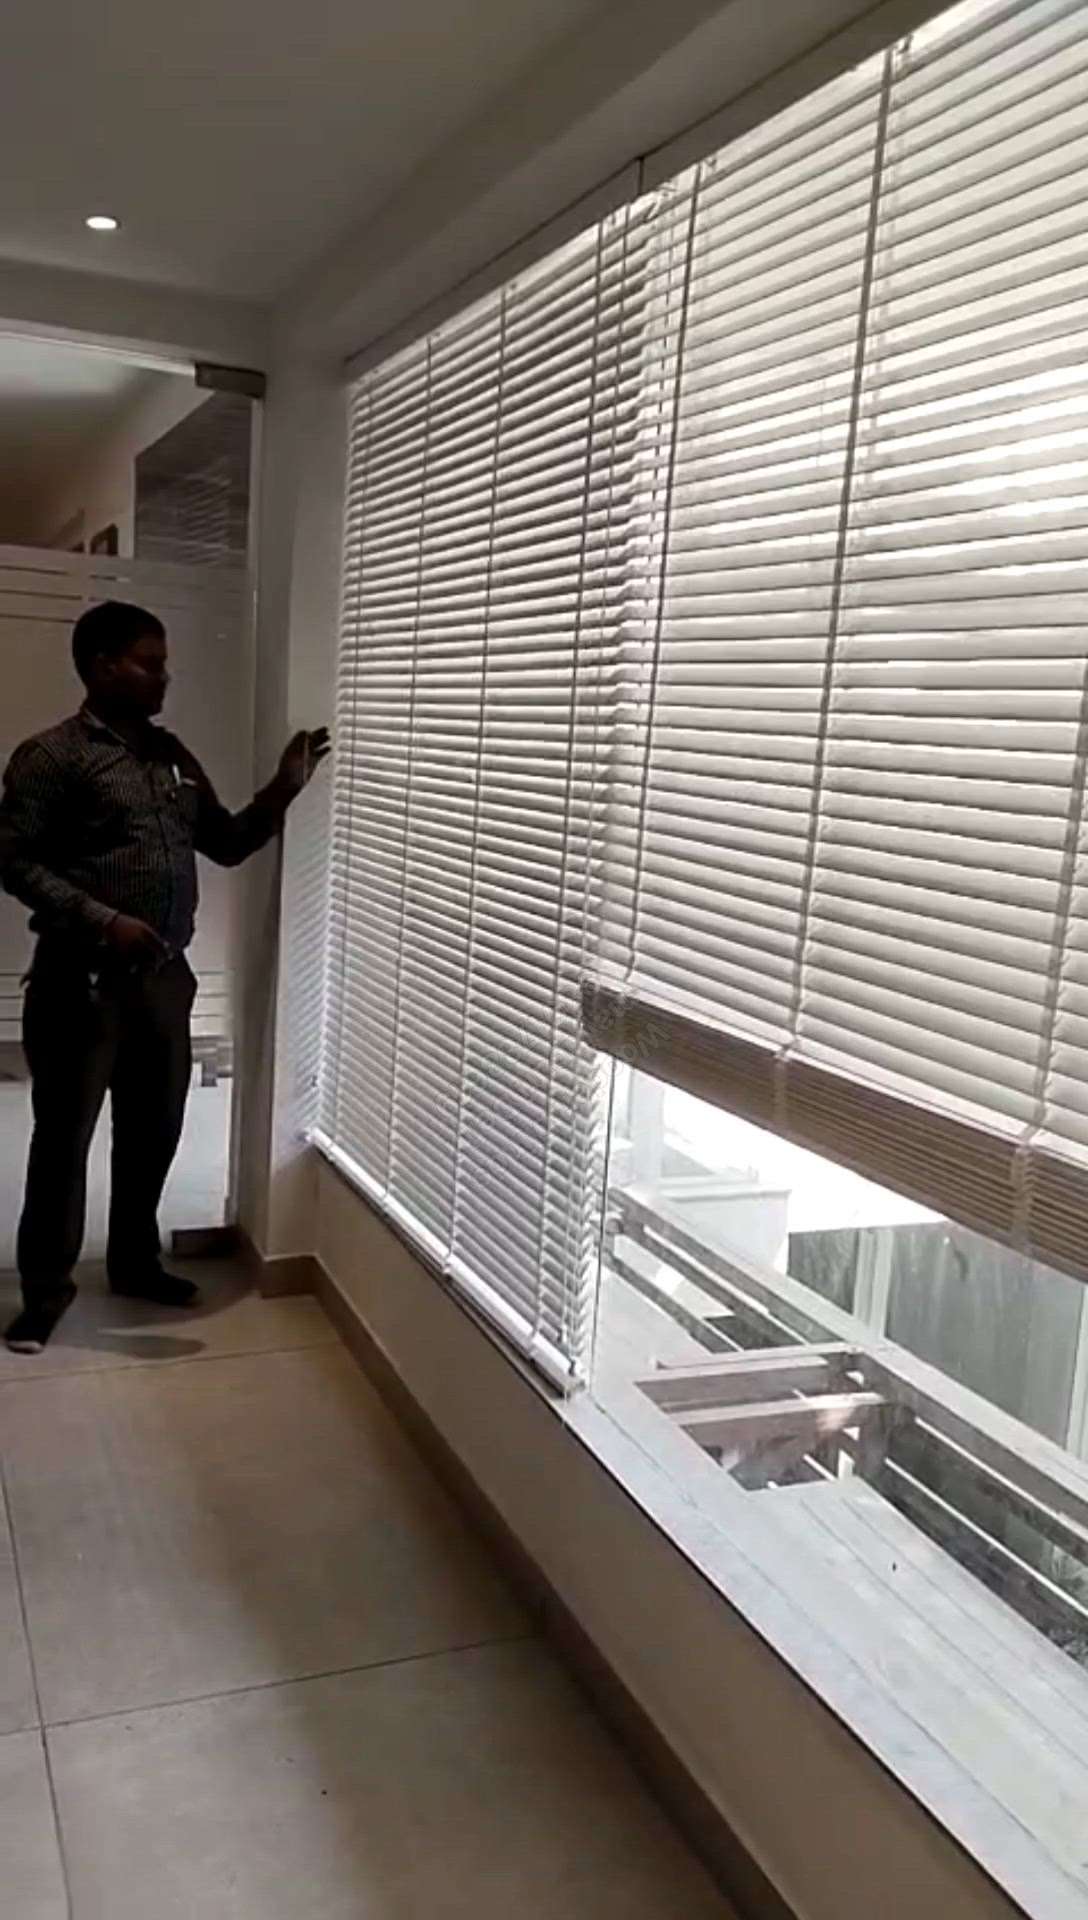 How to #install  #wooden  #blinds for  #windows, mayapuri Delhi,
mobile no - 9891788619